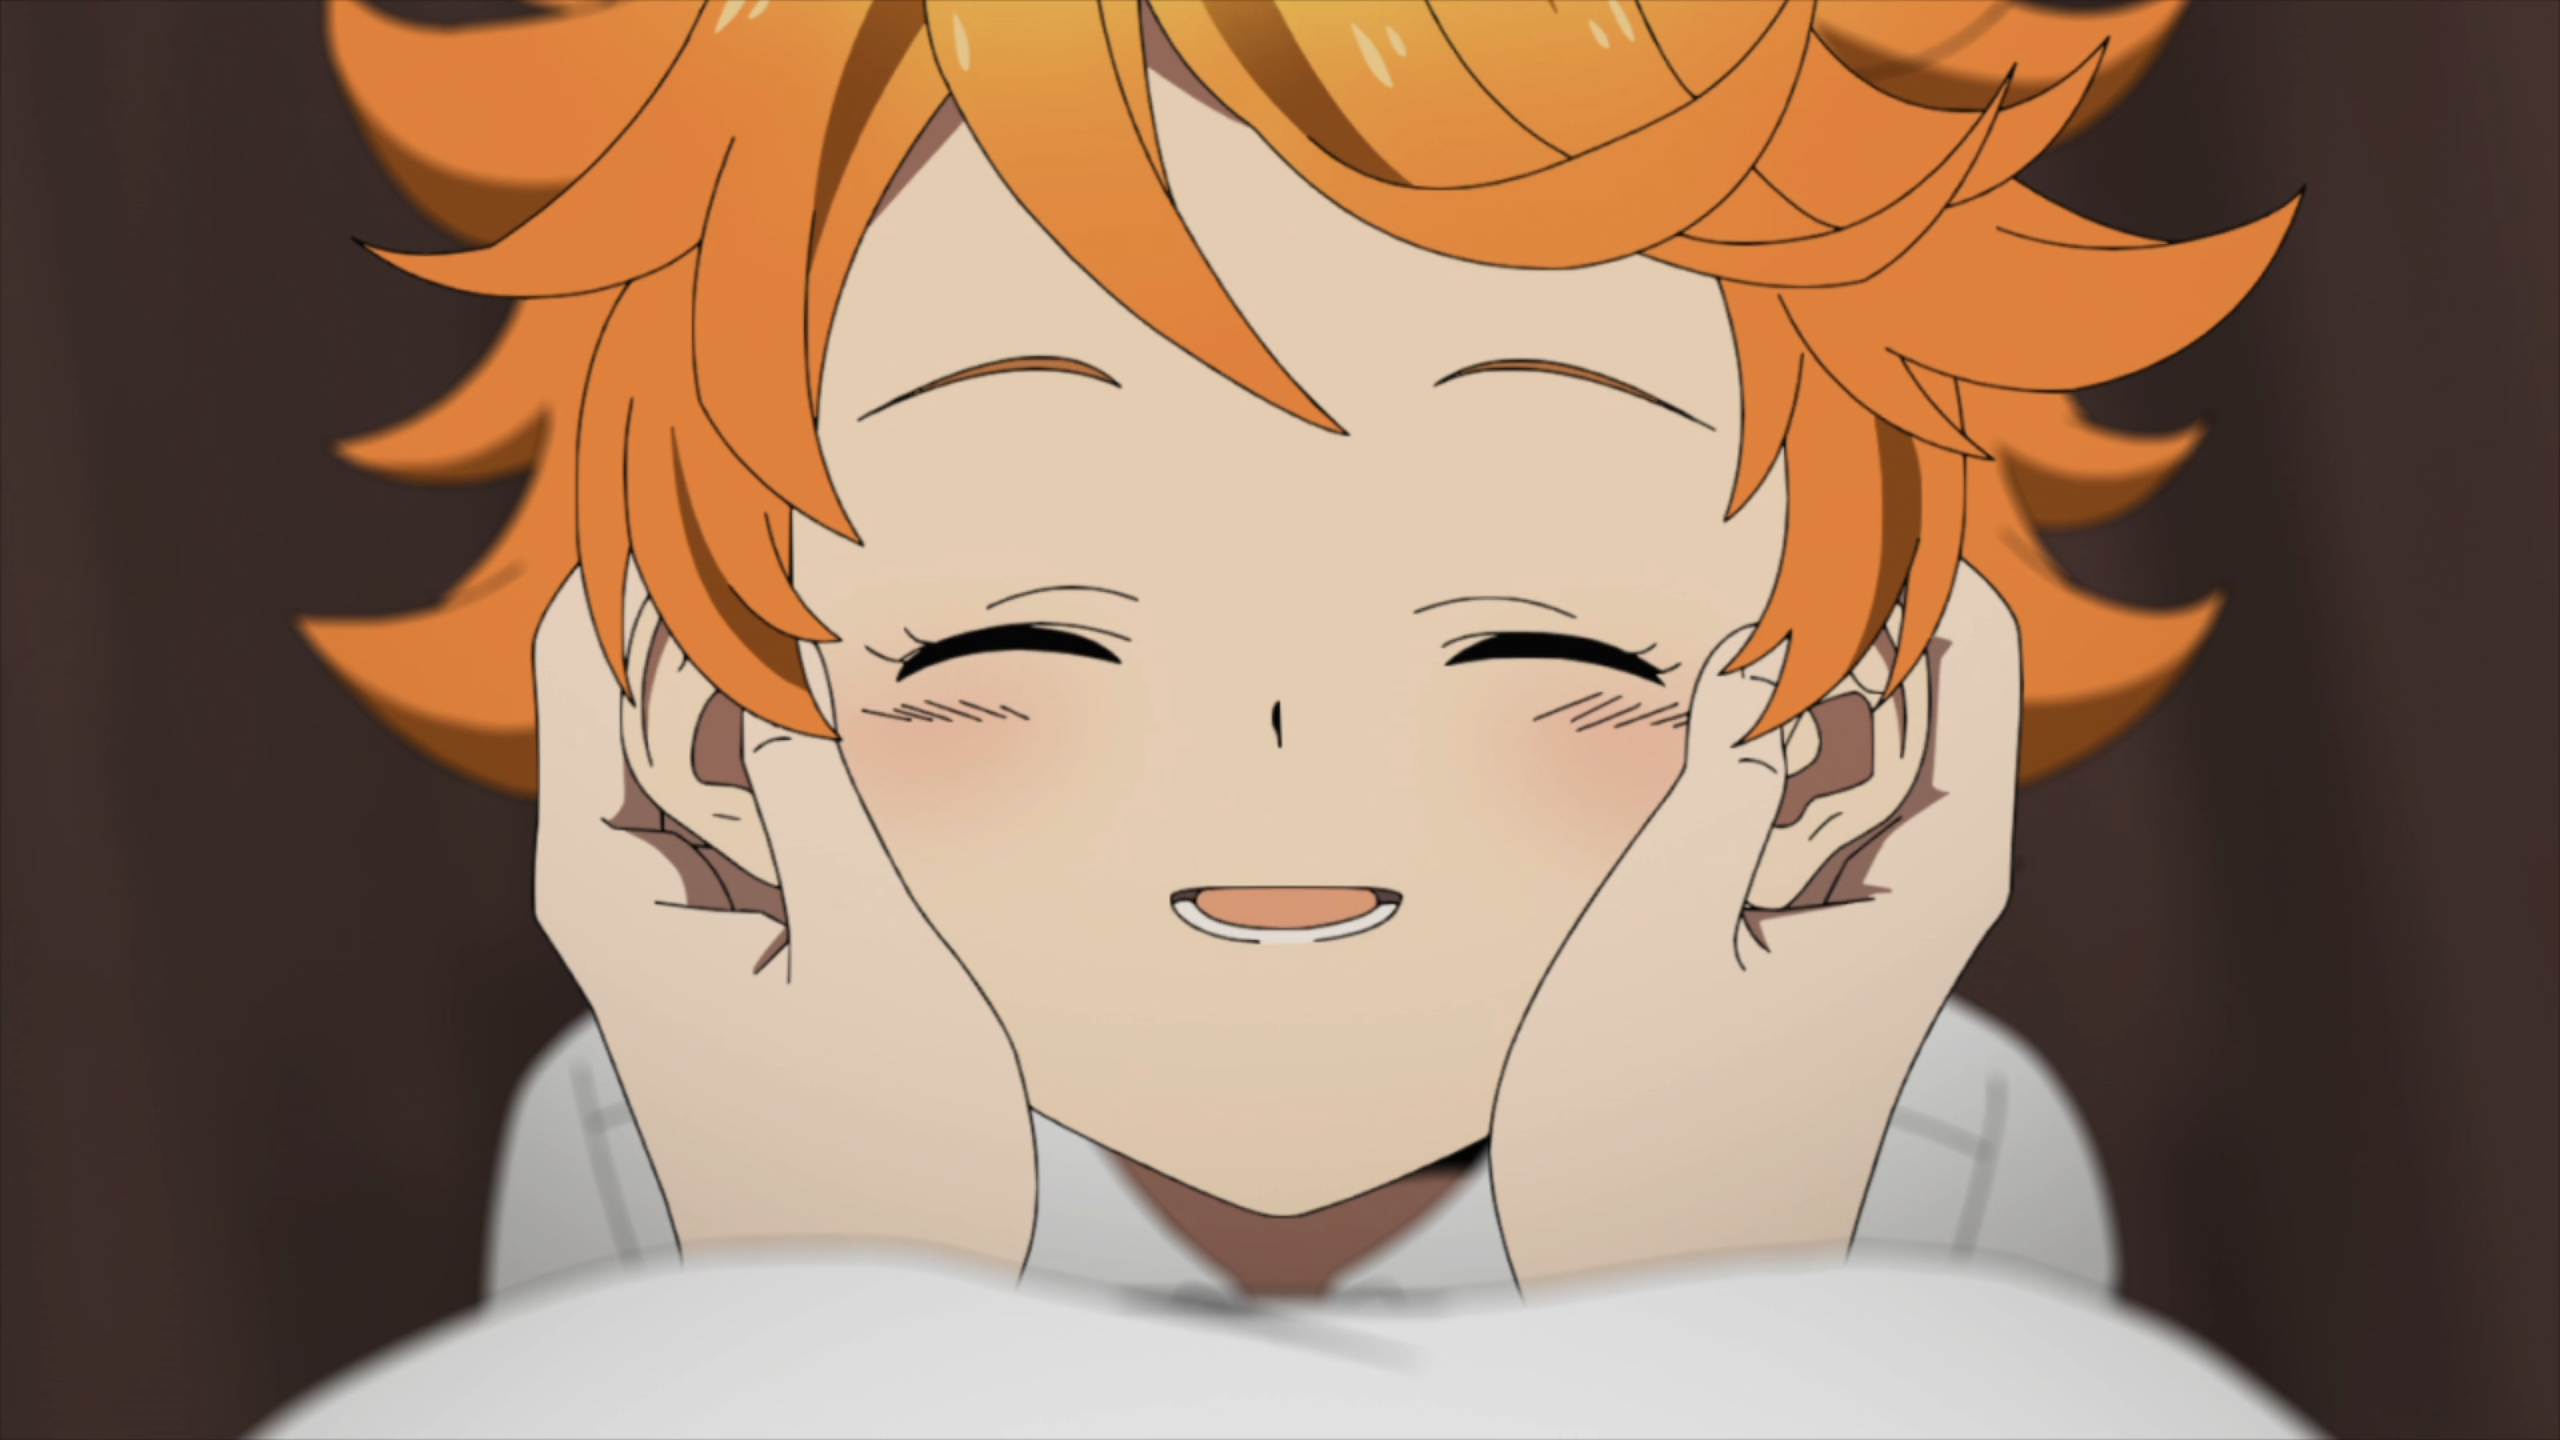 Emma The Promised Neverland Wallpaper HD